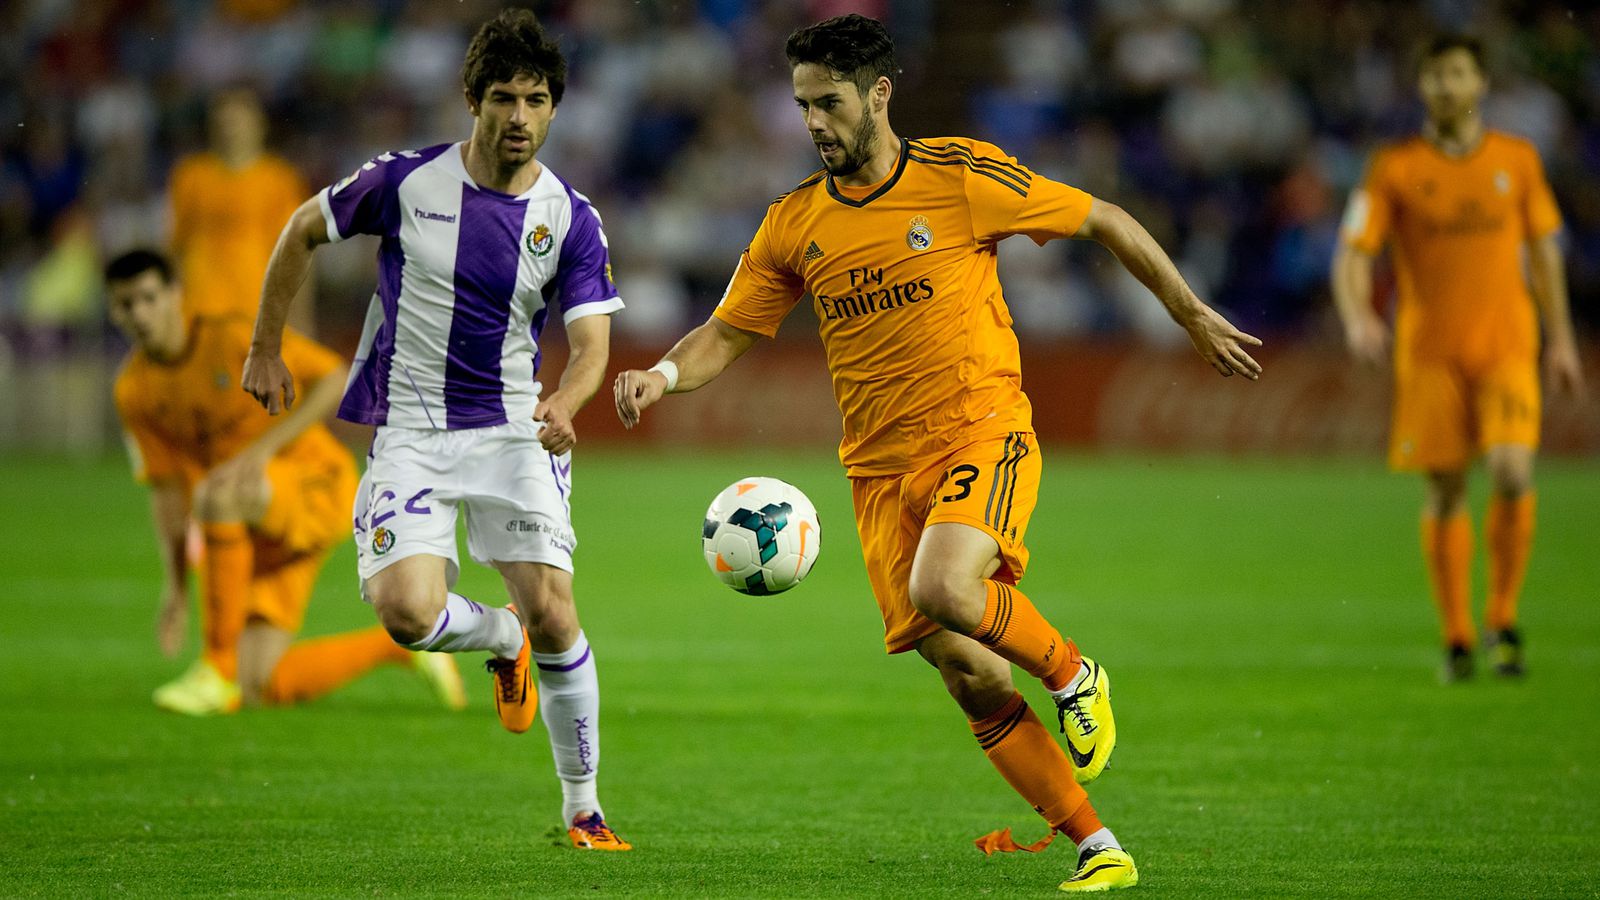 Real Valladolid vs. Real Madrid: Final score 1-1, no one wants to win La Liga -